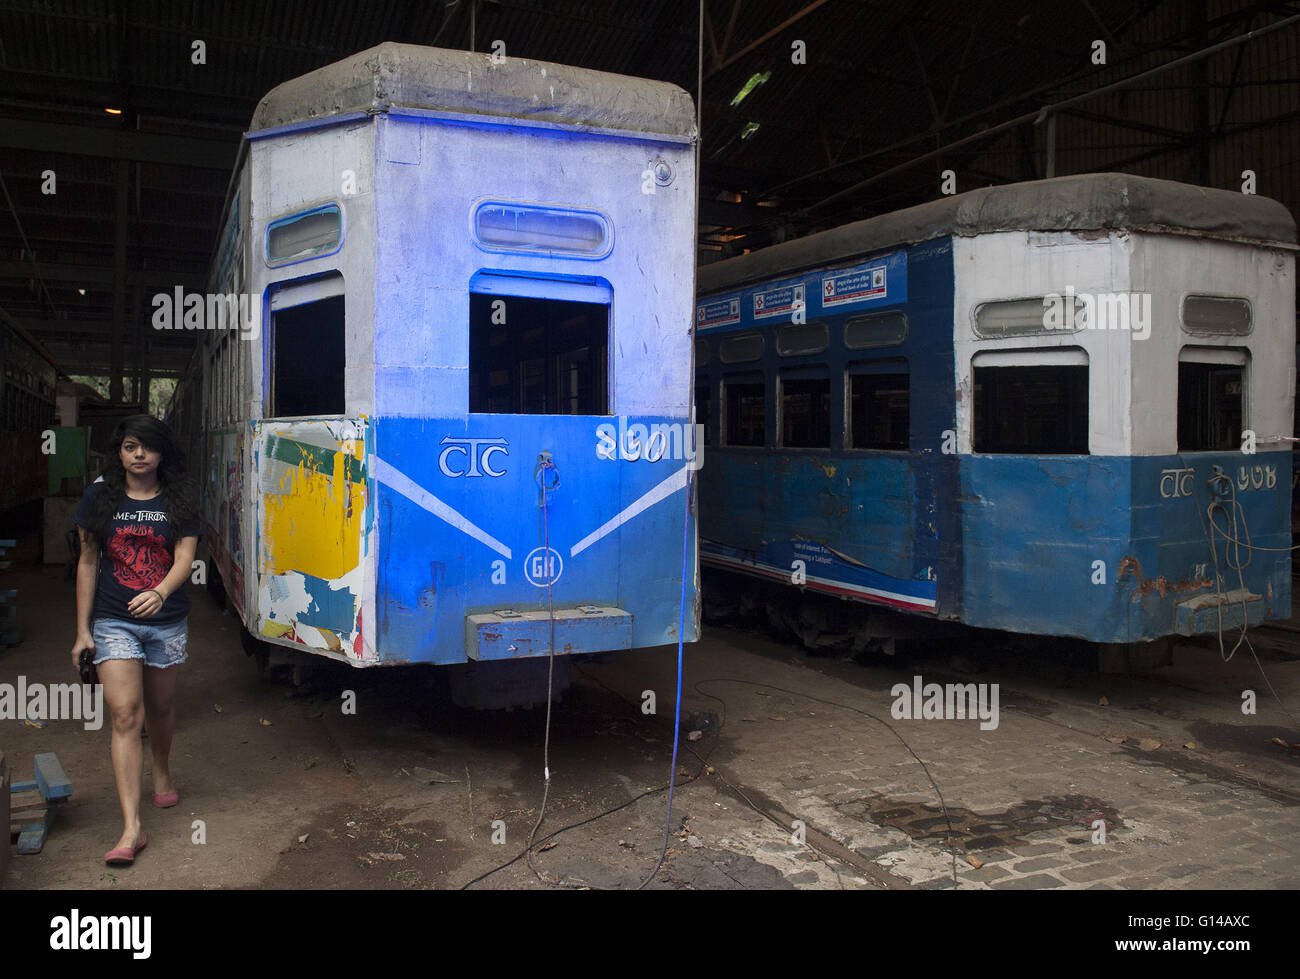 Kolkata, Indian state West Bengal. 8th May, 2016. A visitor walks beside tramcars during the two-day event Tram Tales at a tram depot in Kolkata, capital of eastern Indian state West Bengal, May 8, 2016. Tram Tales was planned as a unique mixed - media interactive visual installation piece using videos, music, photography, games, food and interaction to celebrate the nostalgia of trams as a symbol of Kolkata's rich colonial-era heritage. The event was held from May 7 to 8. © Tumpa Mondal/Xinhua/Alamy Live News Stock Photo